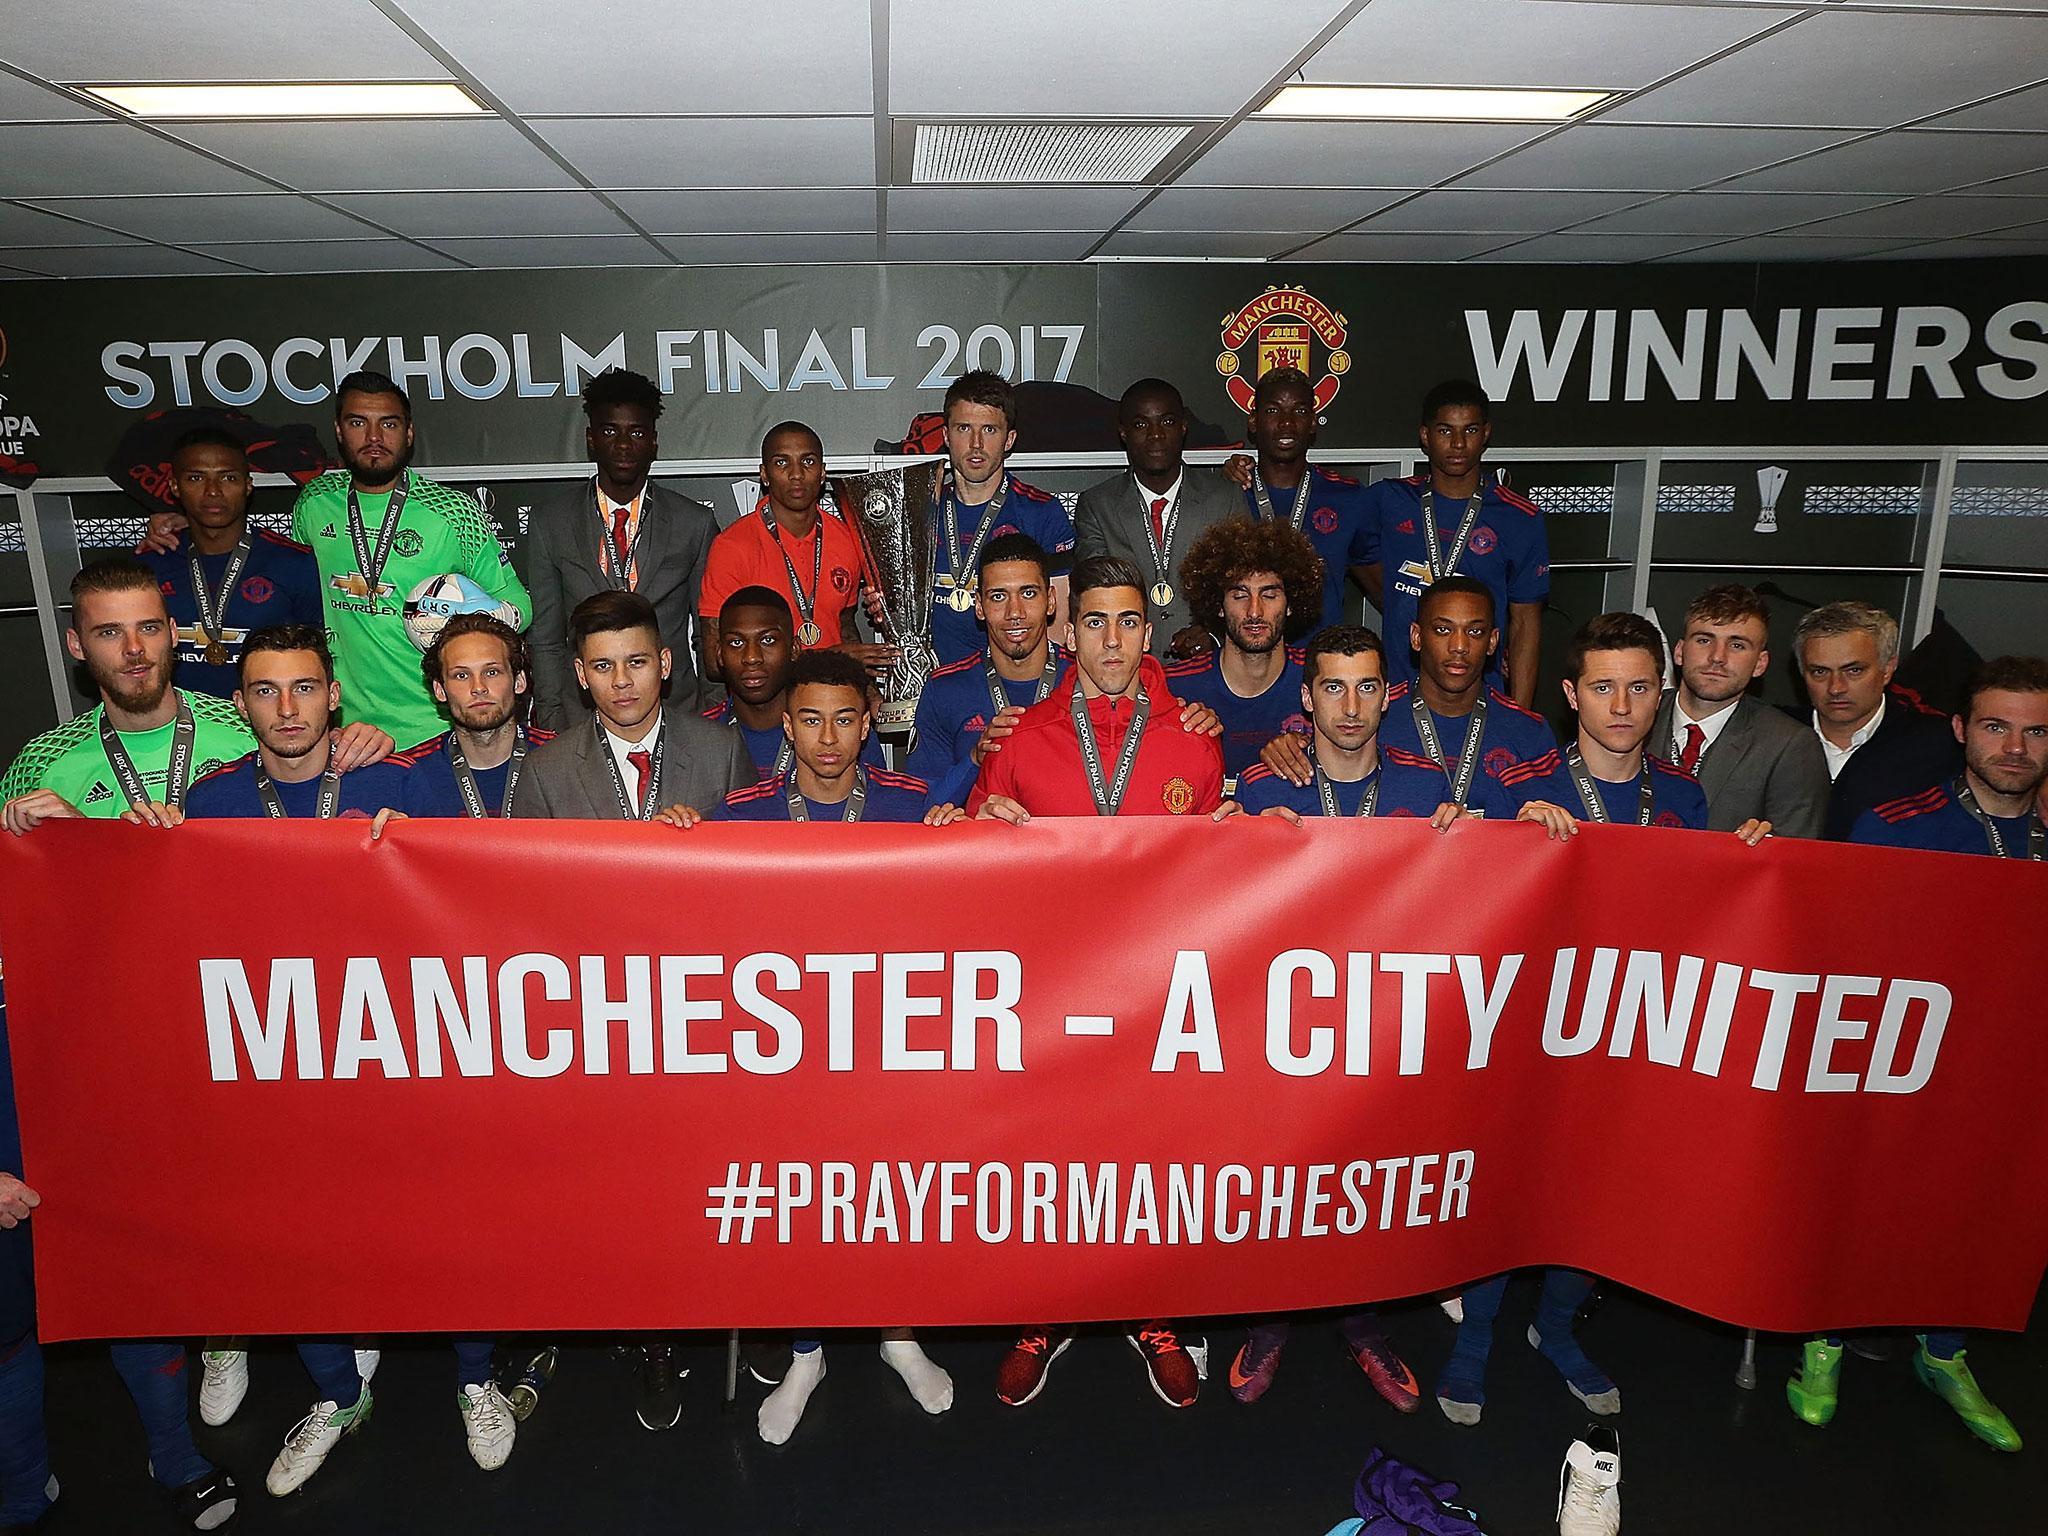 Manchester United won on a poignant night for the players, the club and their city